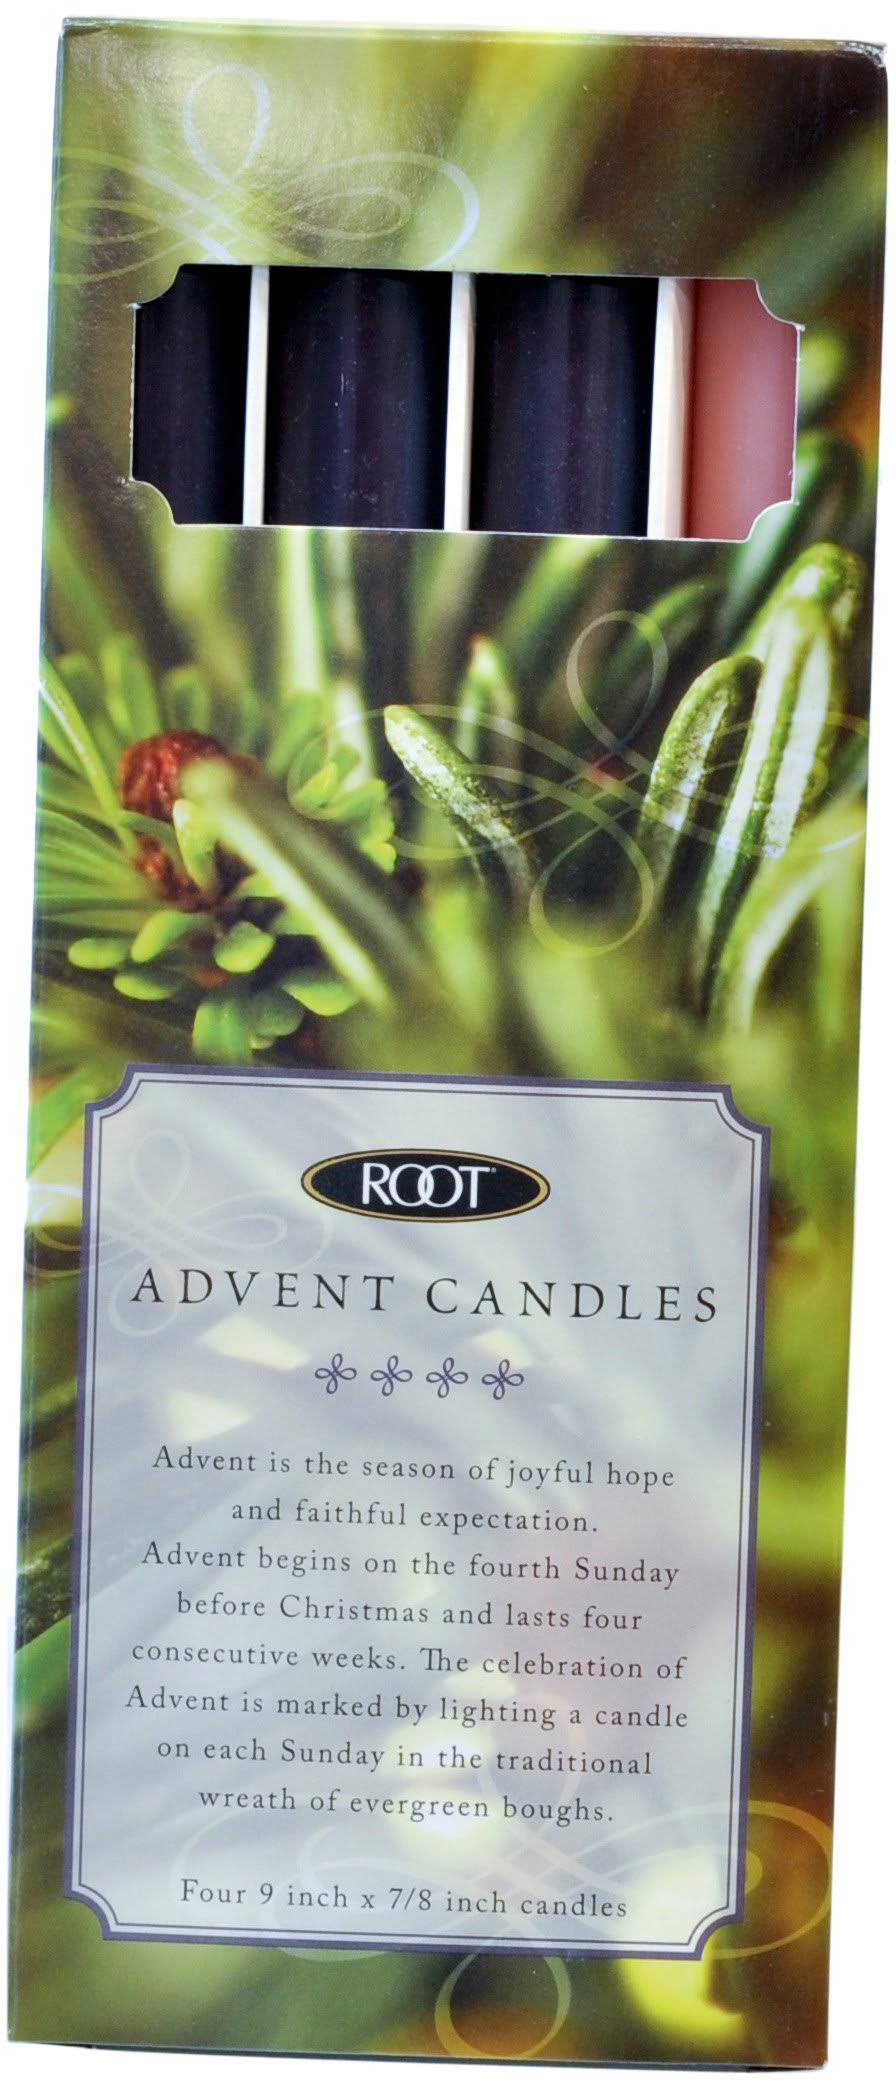 Root Advent Candles